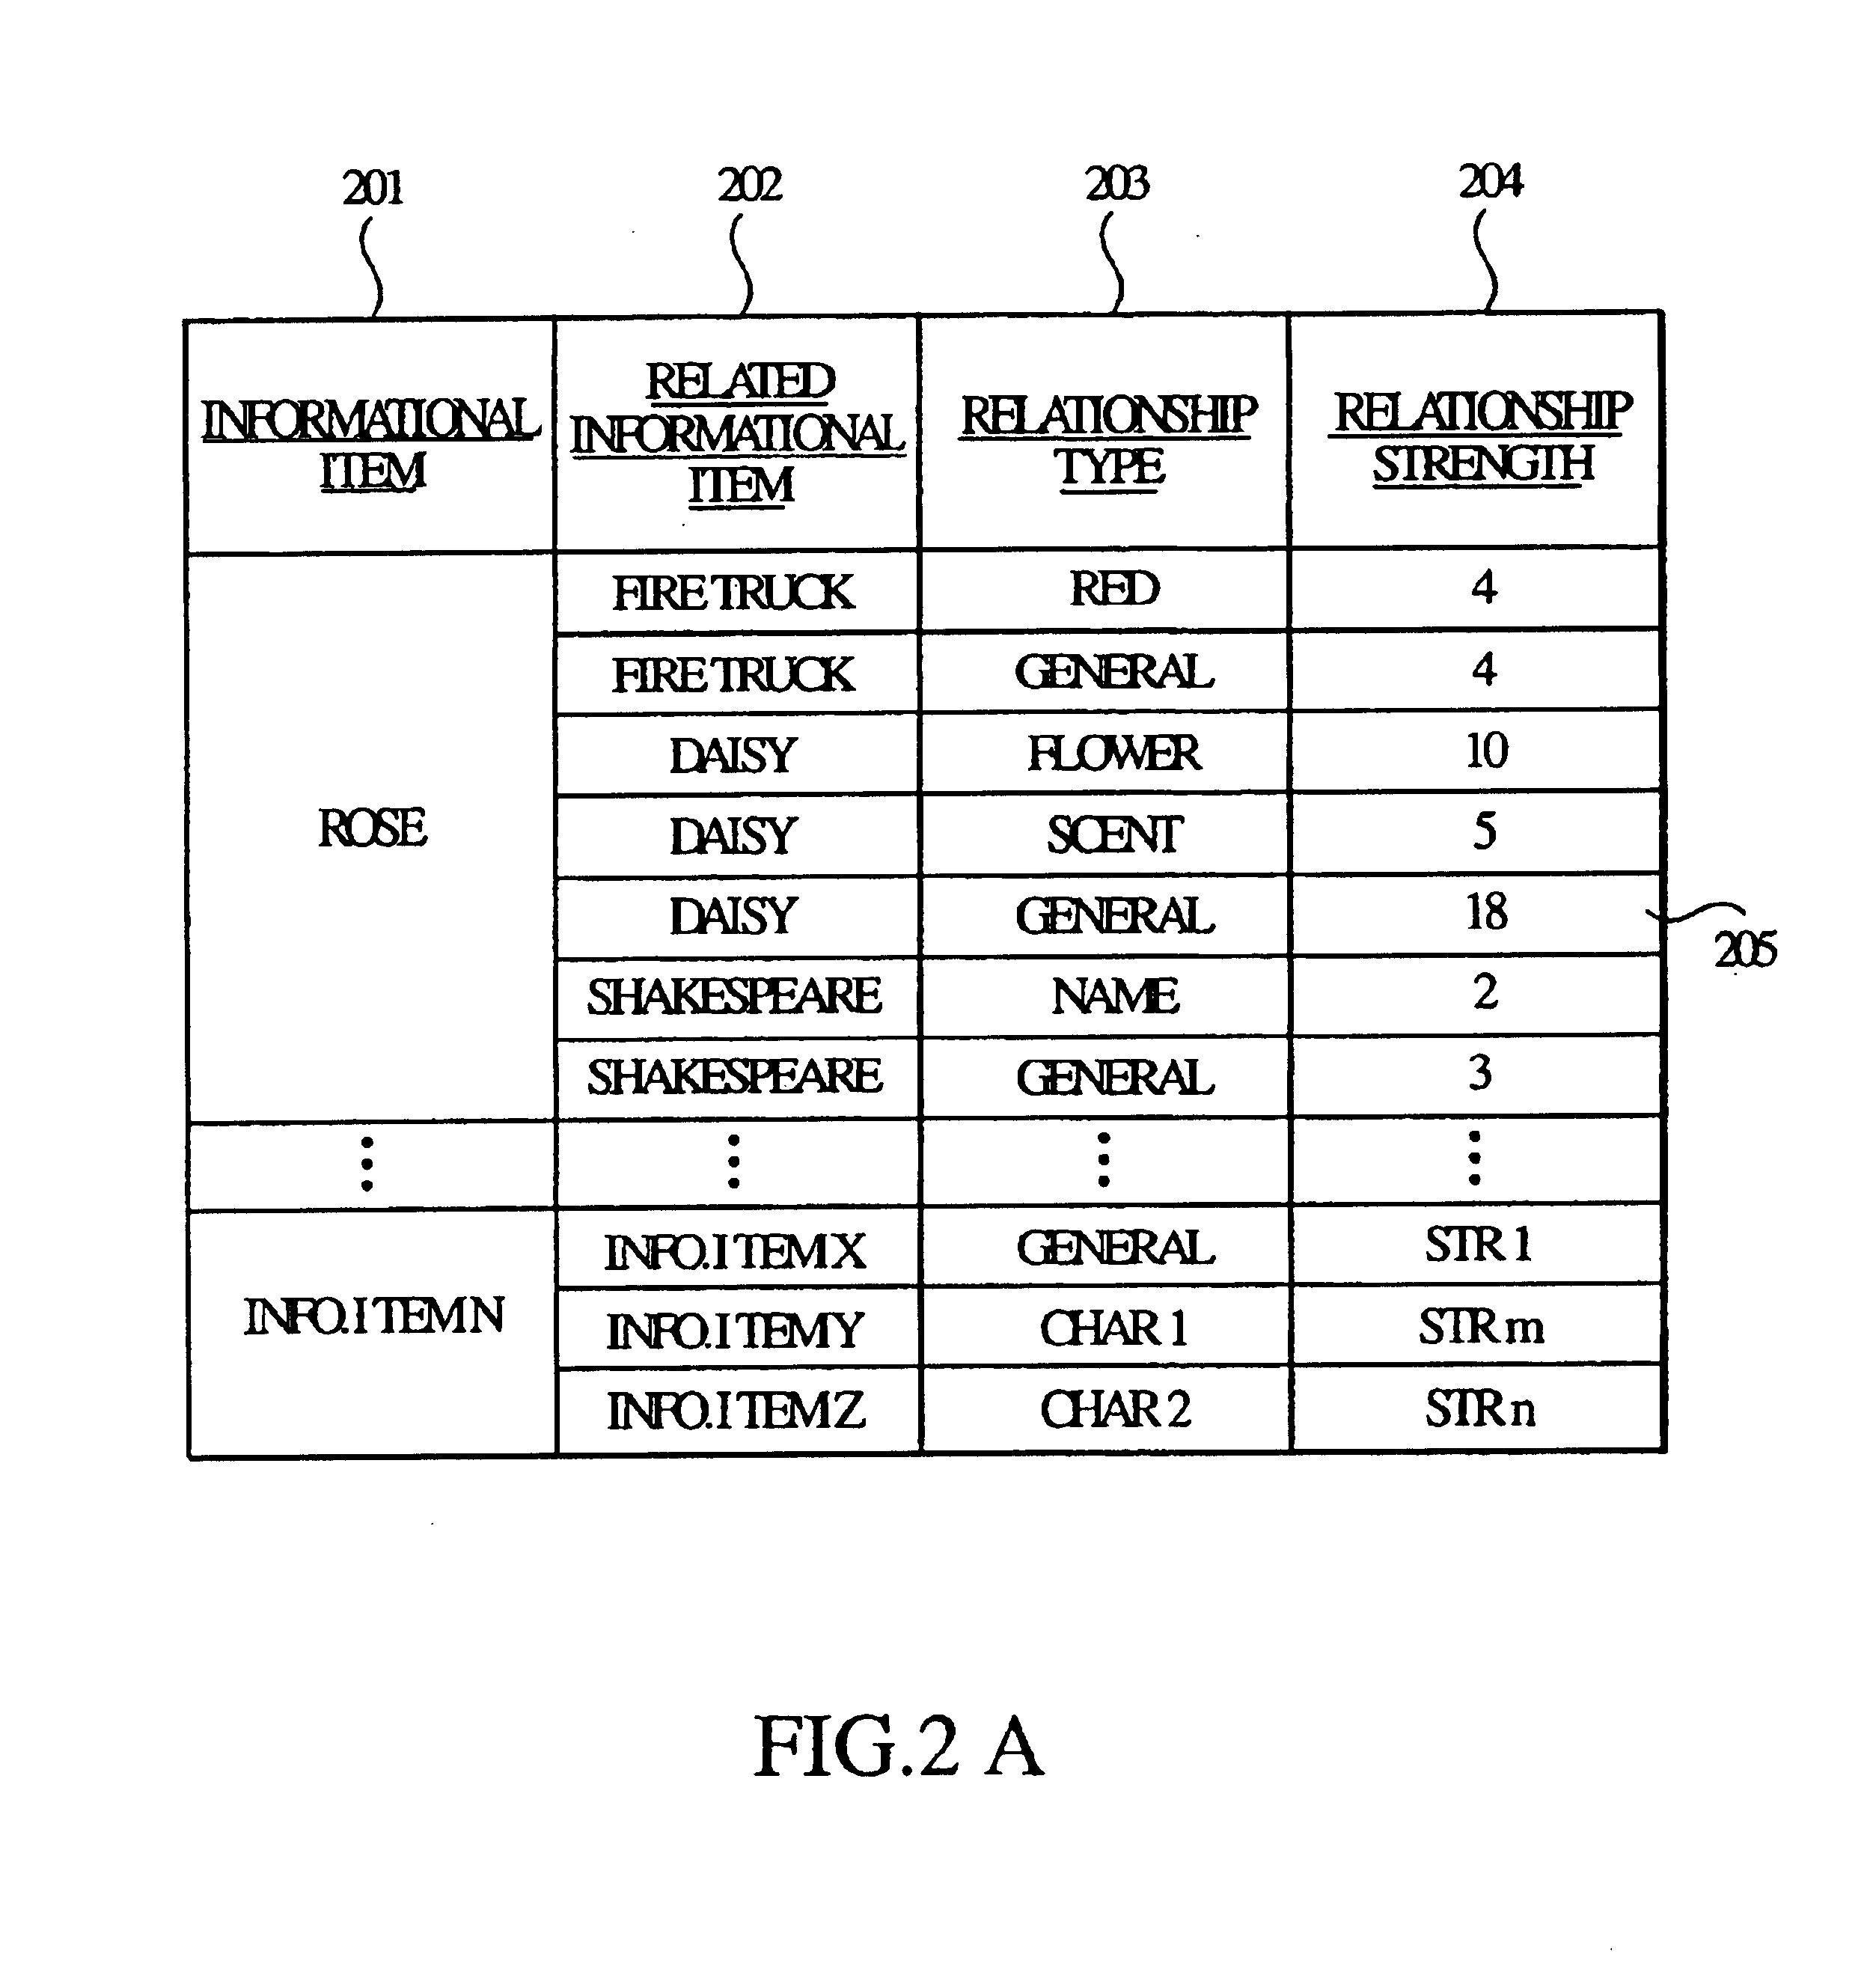 Usage based strength between related information in an information retrieval system